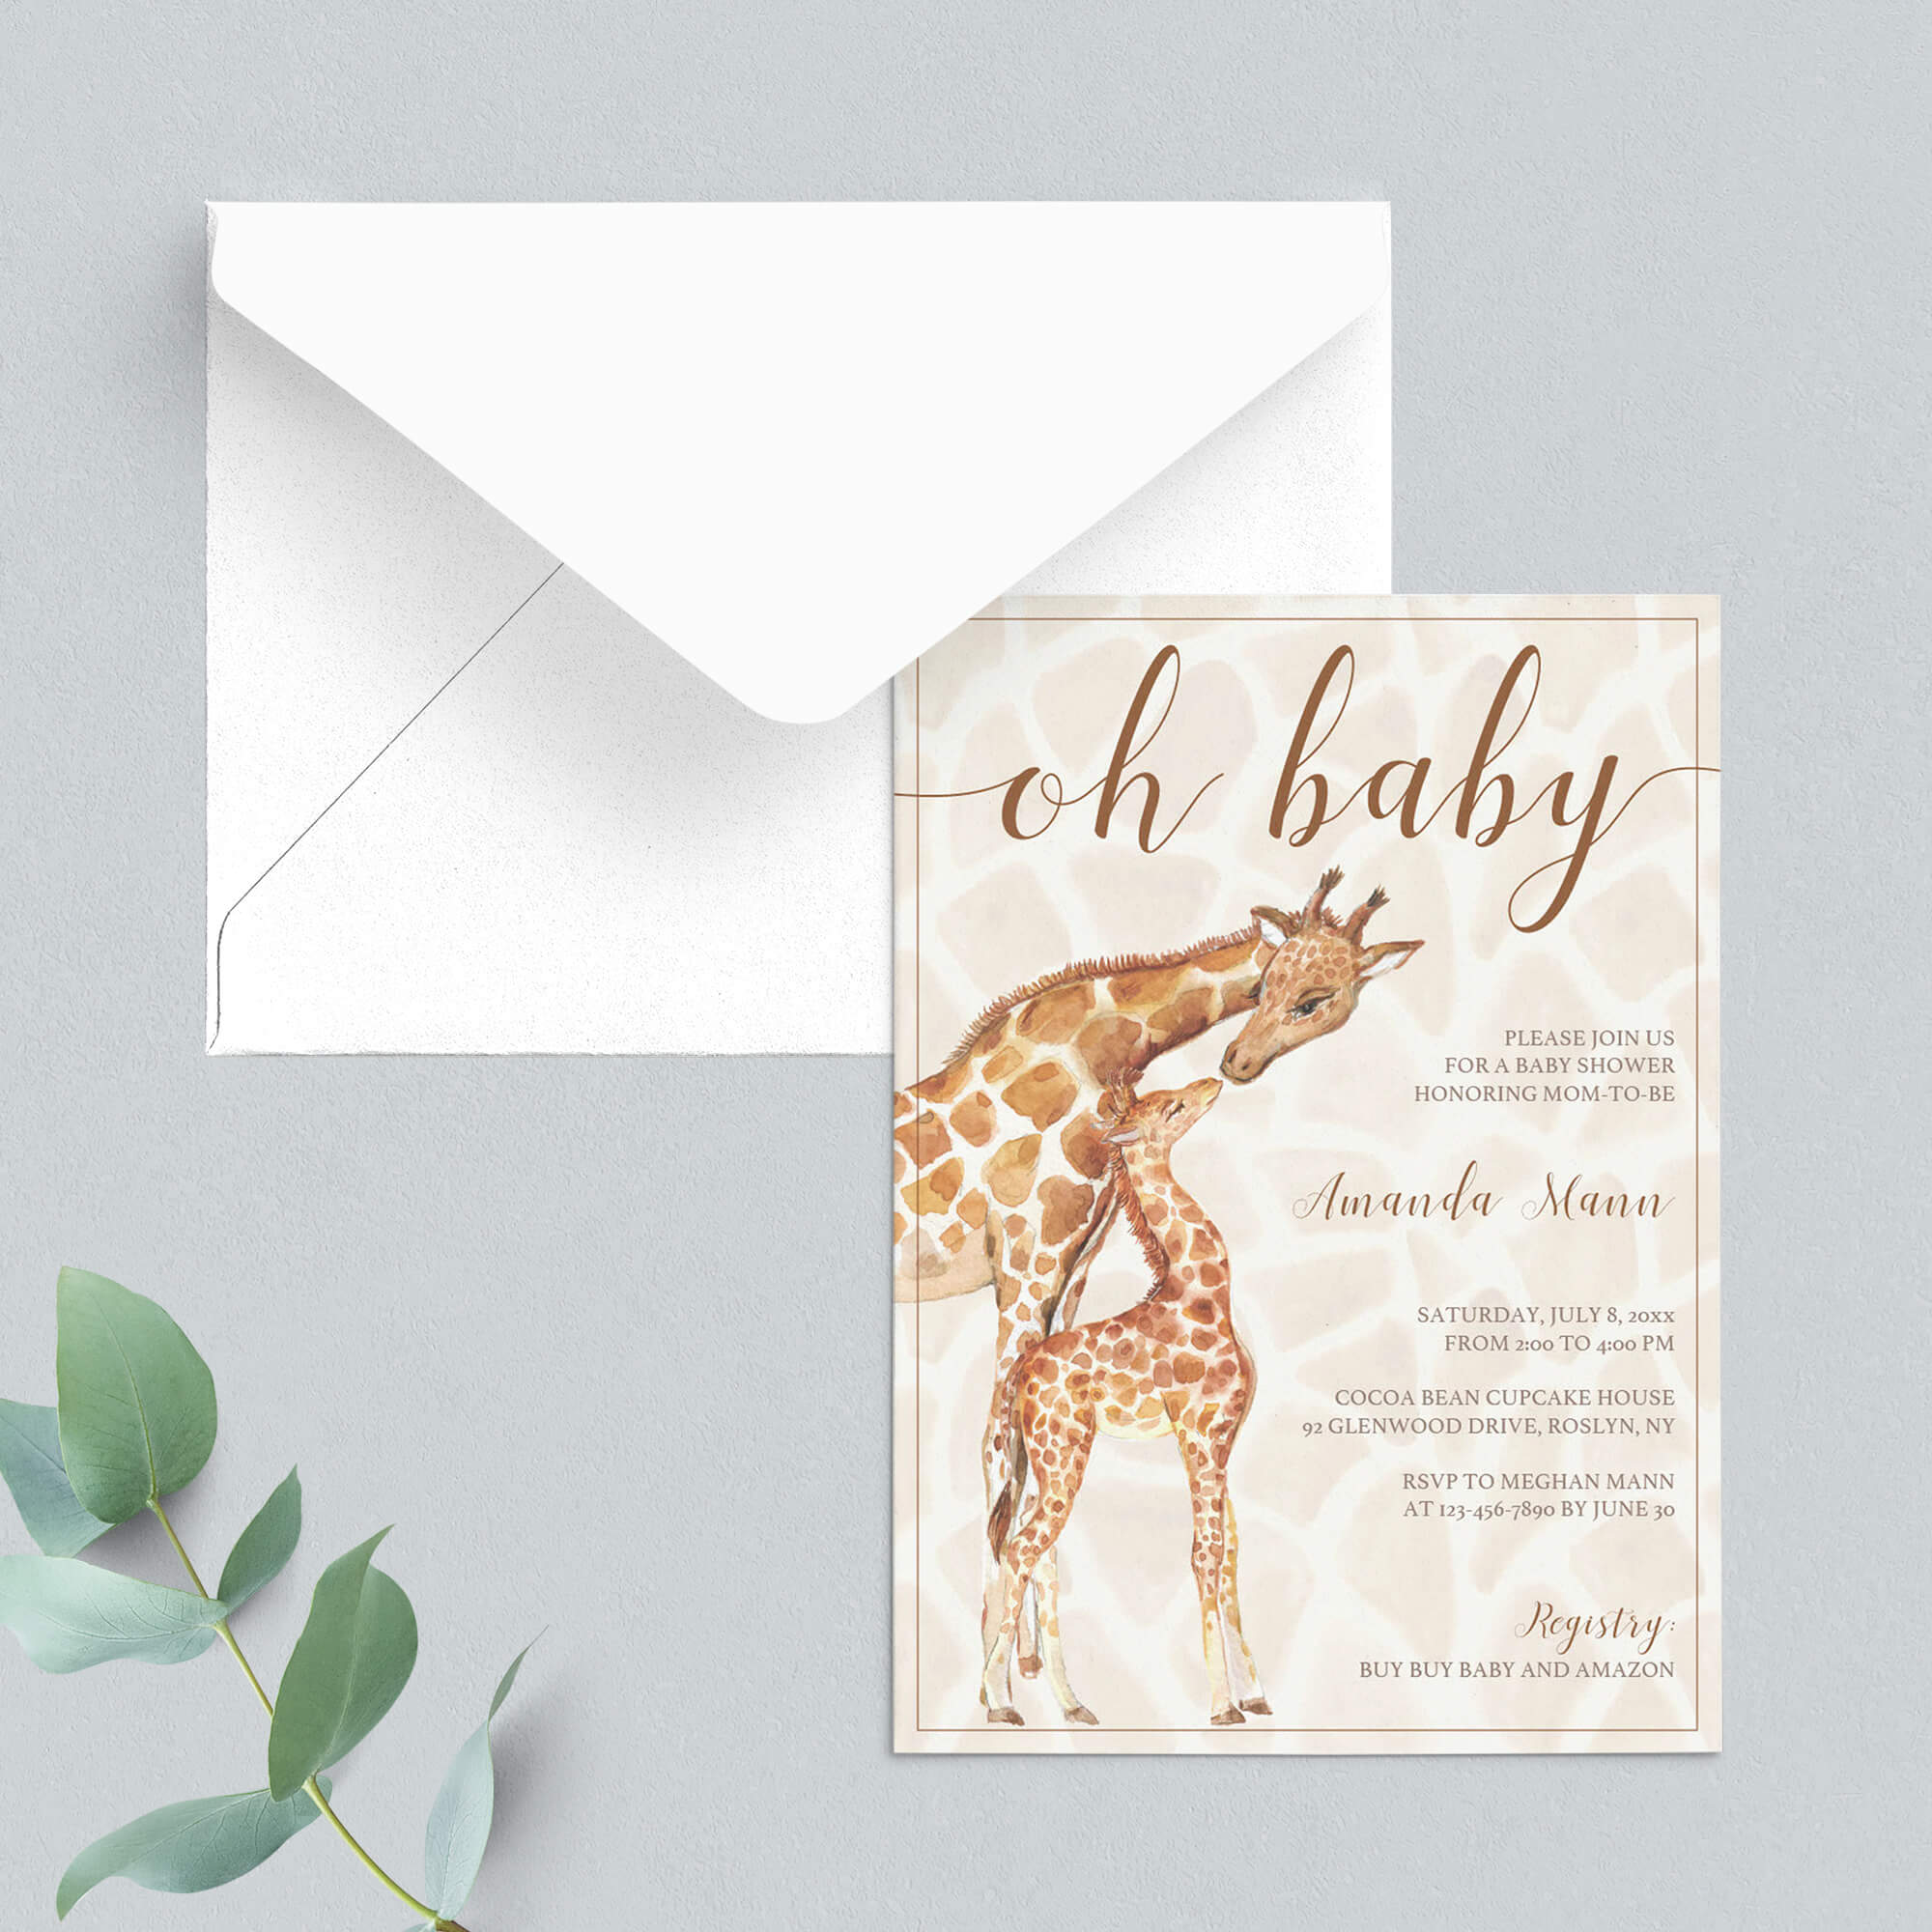 Oh Baby Baby Shower Invitation Template Giraffe Themed by LittleSizzle